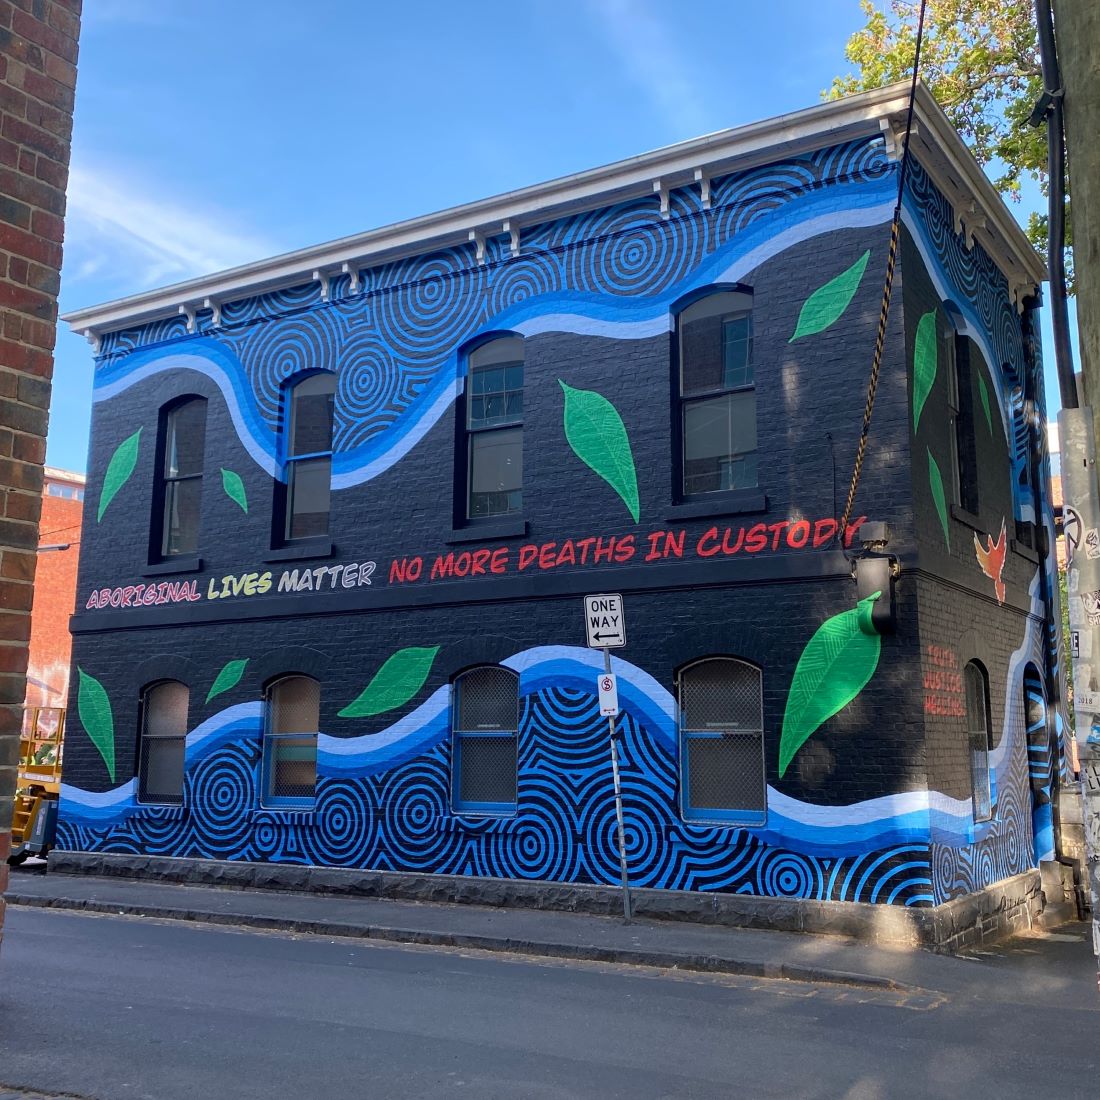 A building on a corner, which has a full-scale mural painted on it. The painting includes Manna gum leaves and the words Aboriginal Lives Matter, No more deaths in custody.